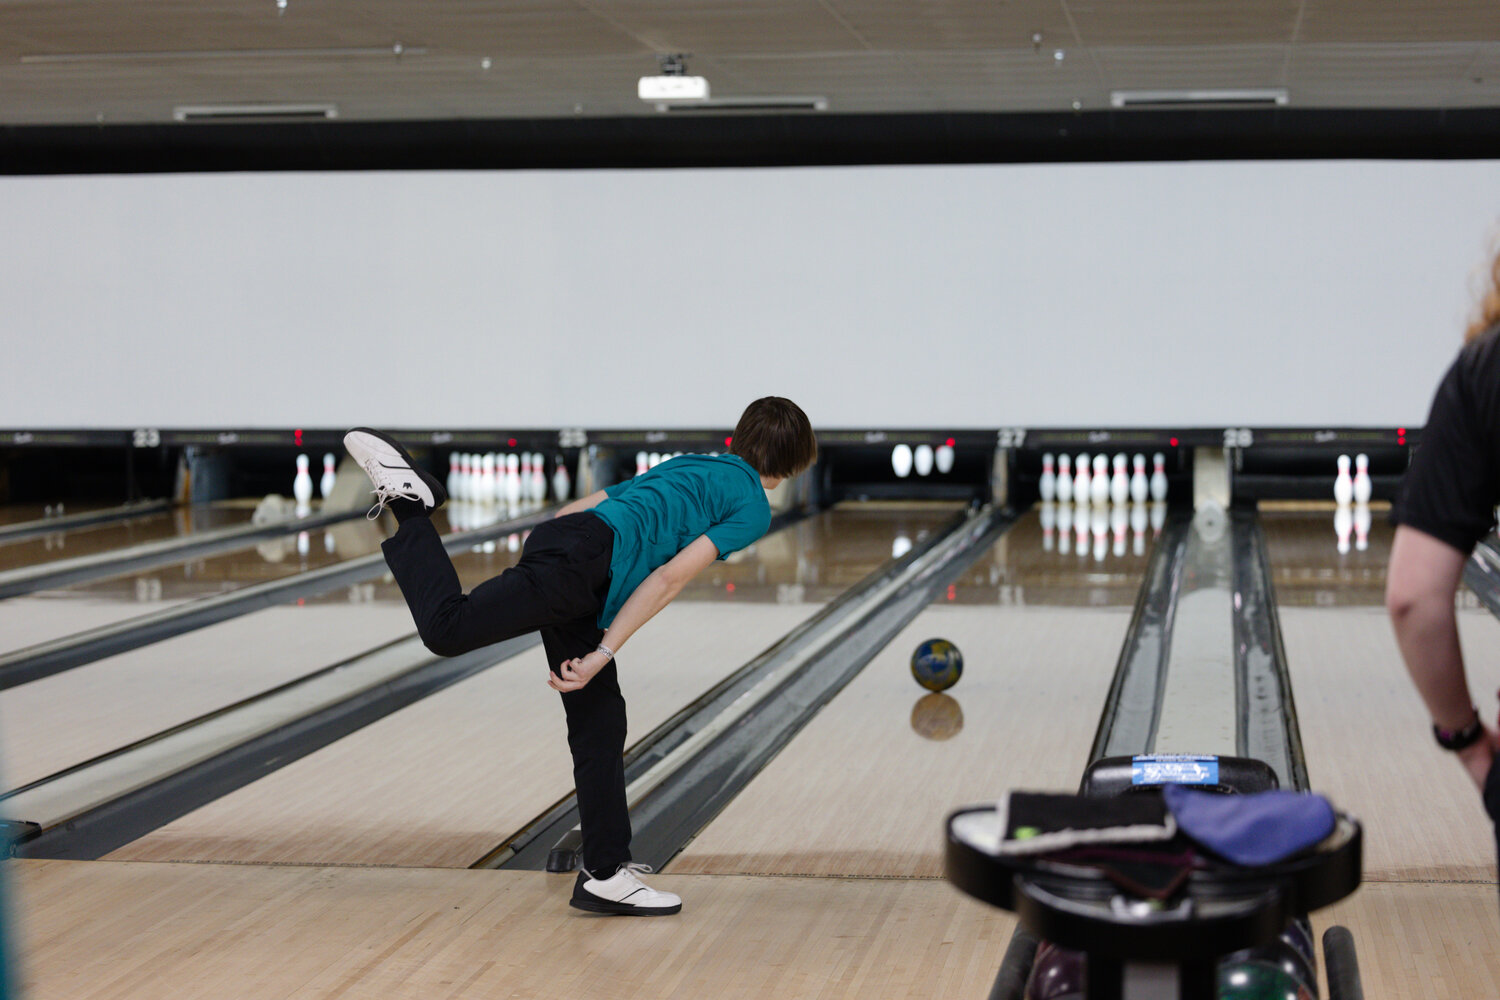 Gulf Shores’ Noah Karas follows through on a shot at the AHSAA State Bowling Championships in Mobile on Thursday, Feb. 1. The Dolphins entered the state tournament as a region champion for the first time.